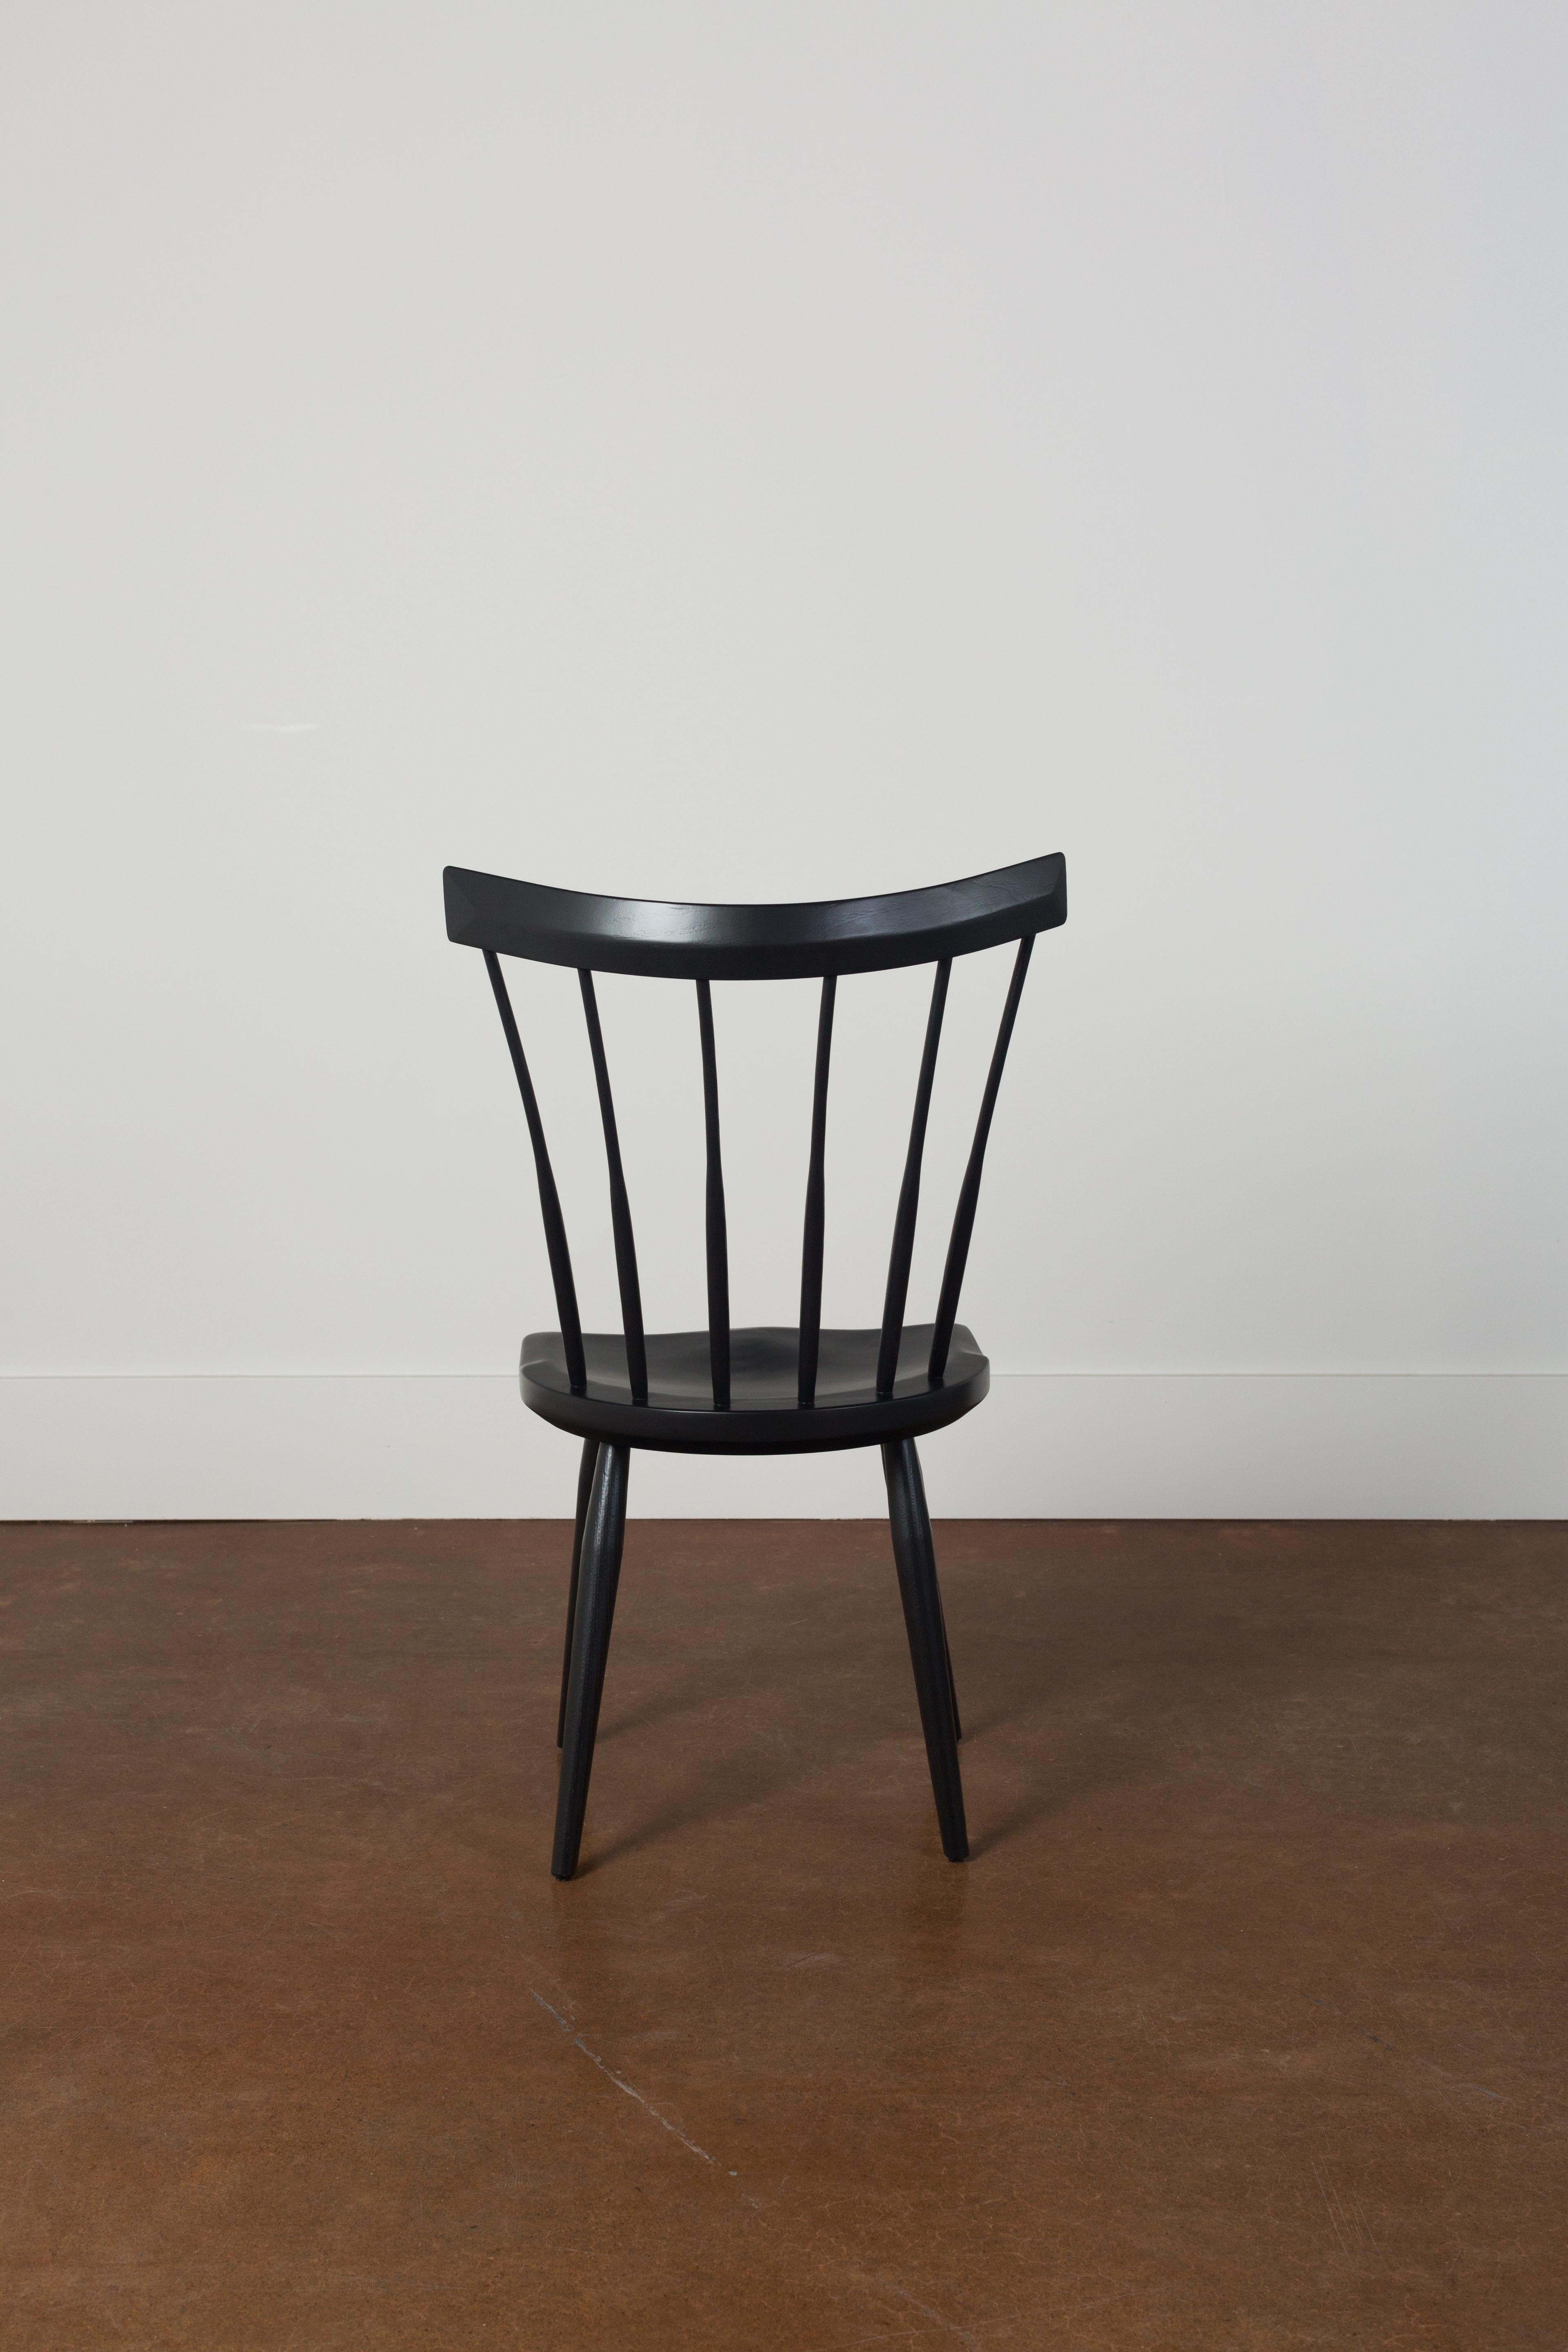 A Windsor chair that’s more city than country.

If you’ve ever visited an Indigo bookstore, you may have already enjoyed the comfort of our iconic modern mid-back Windsor chairs. Now, you can take that comfort and craftsmanship home.

This side